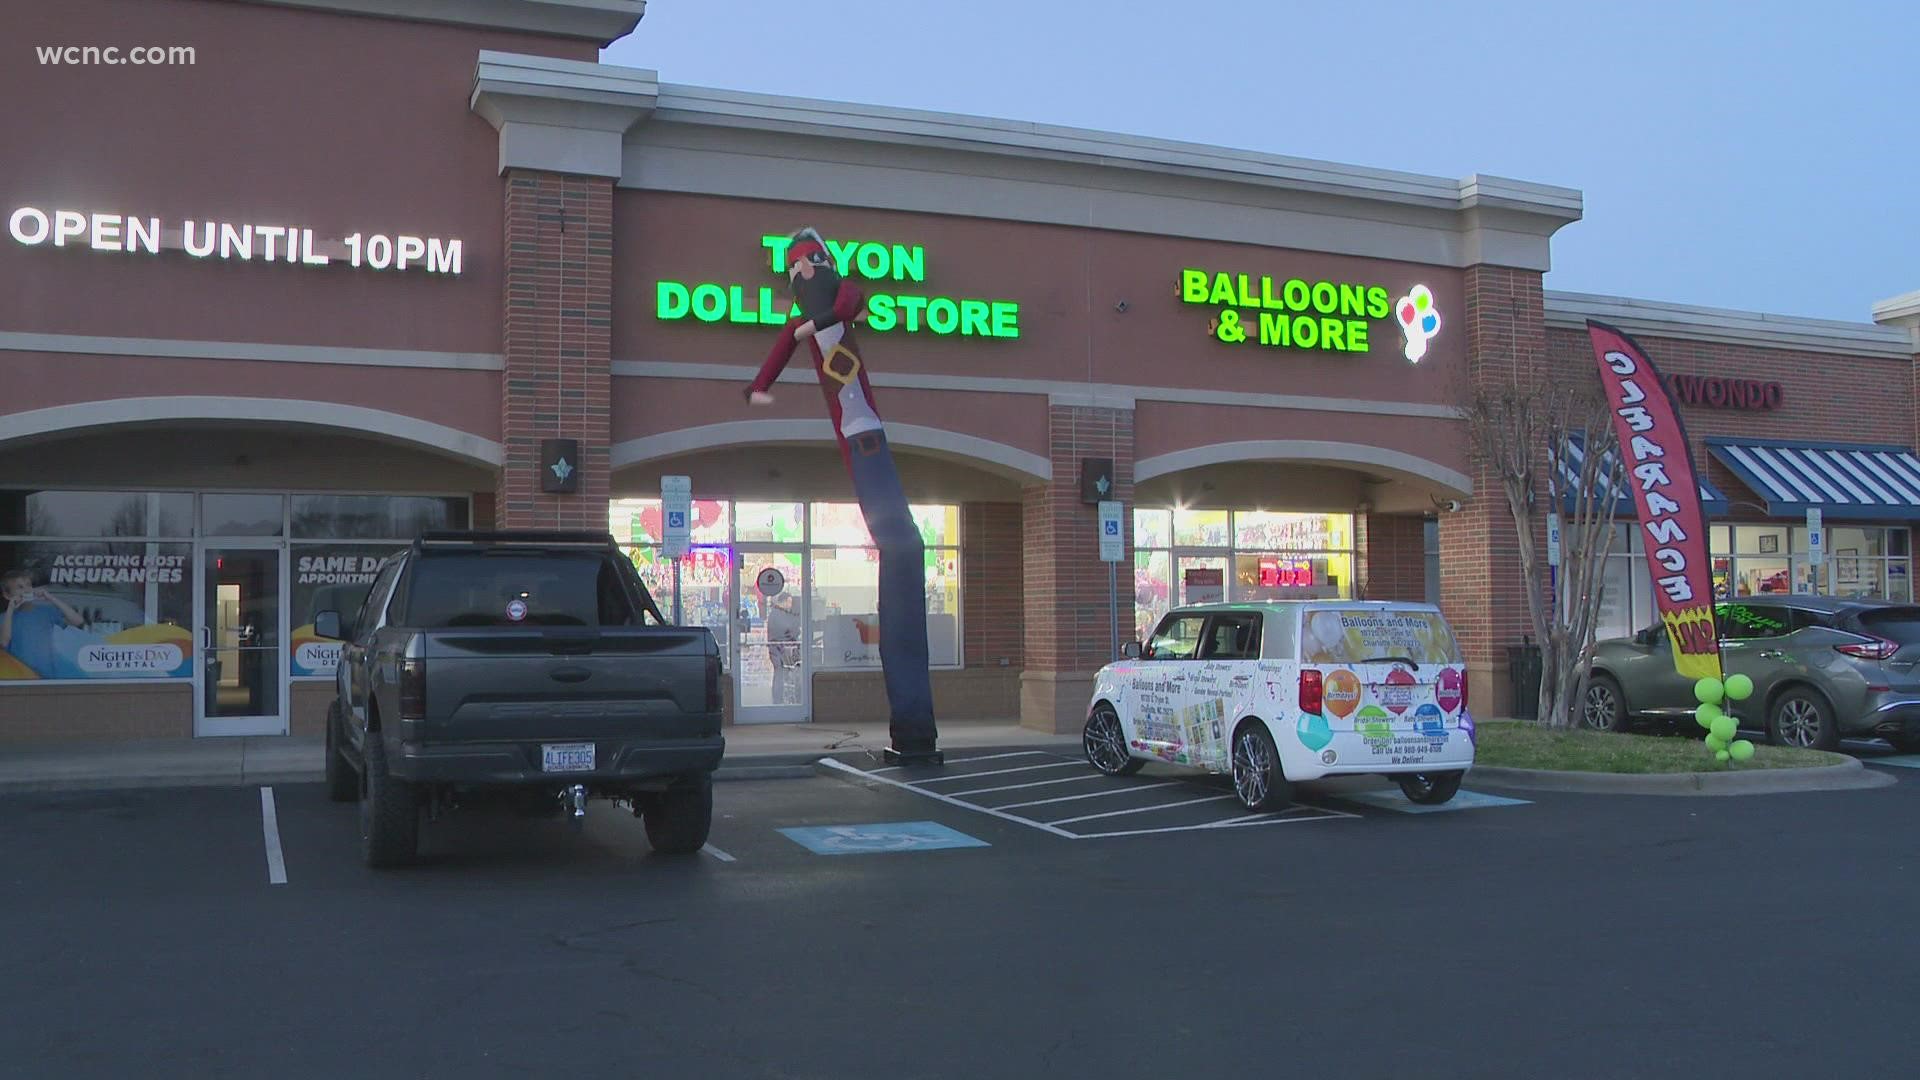 Have you visited the Tryon Dollar Store?